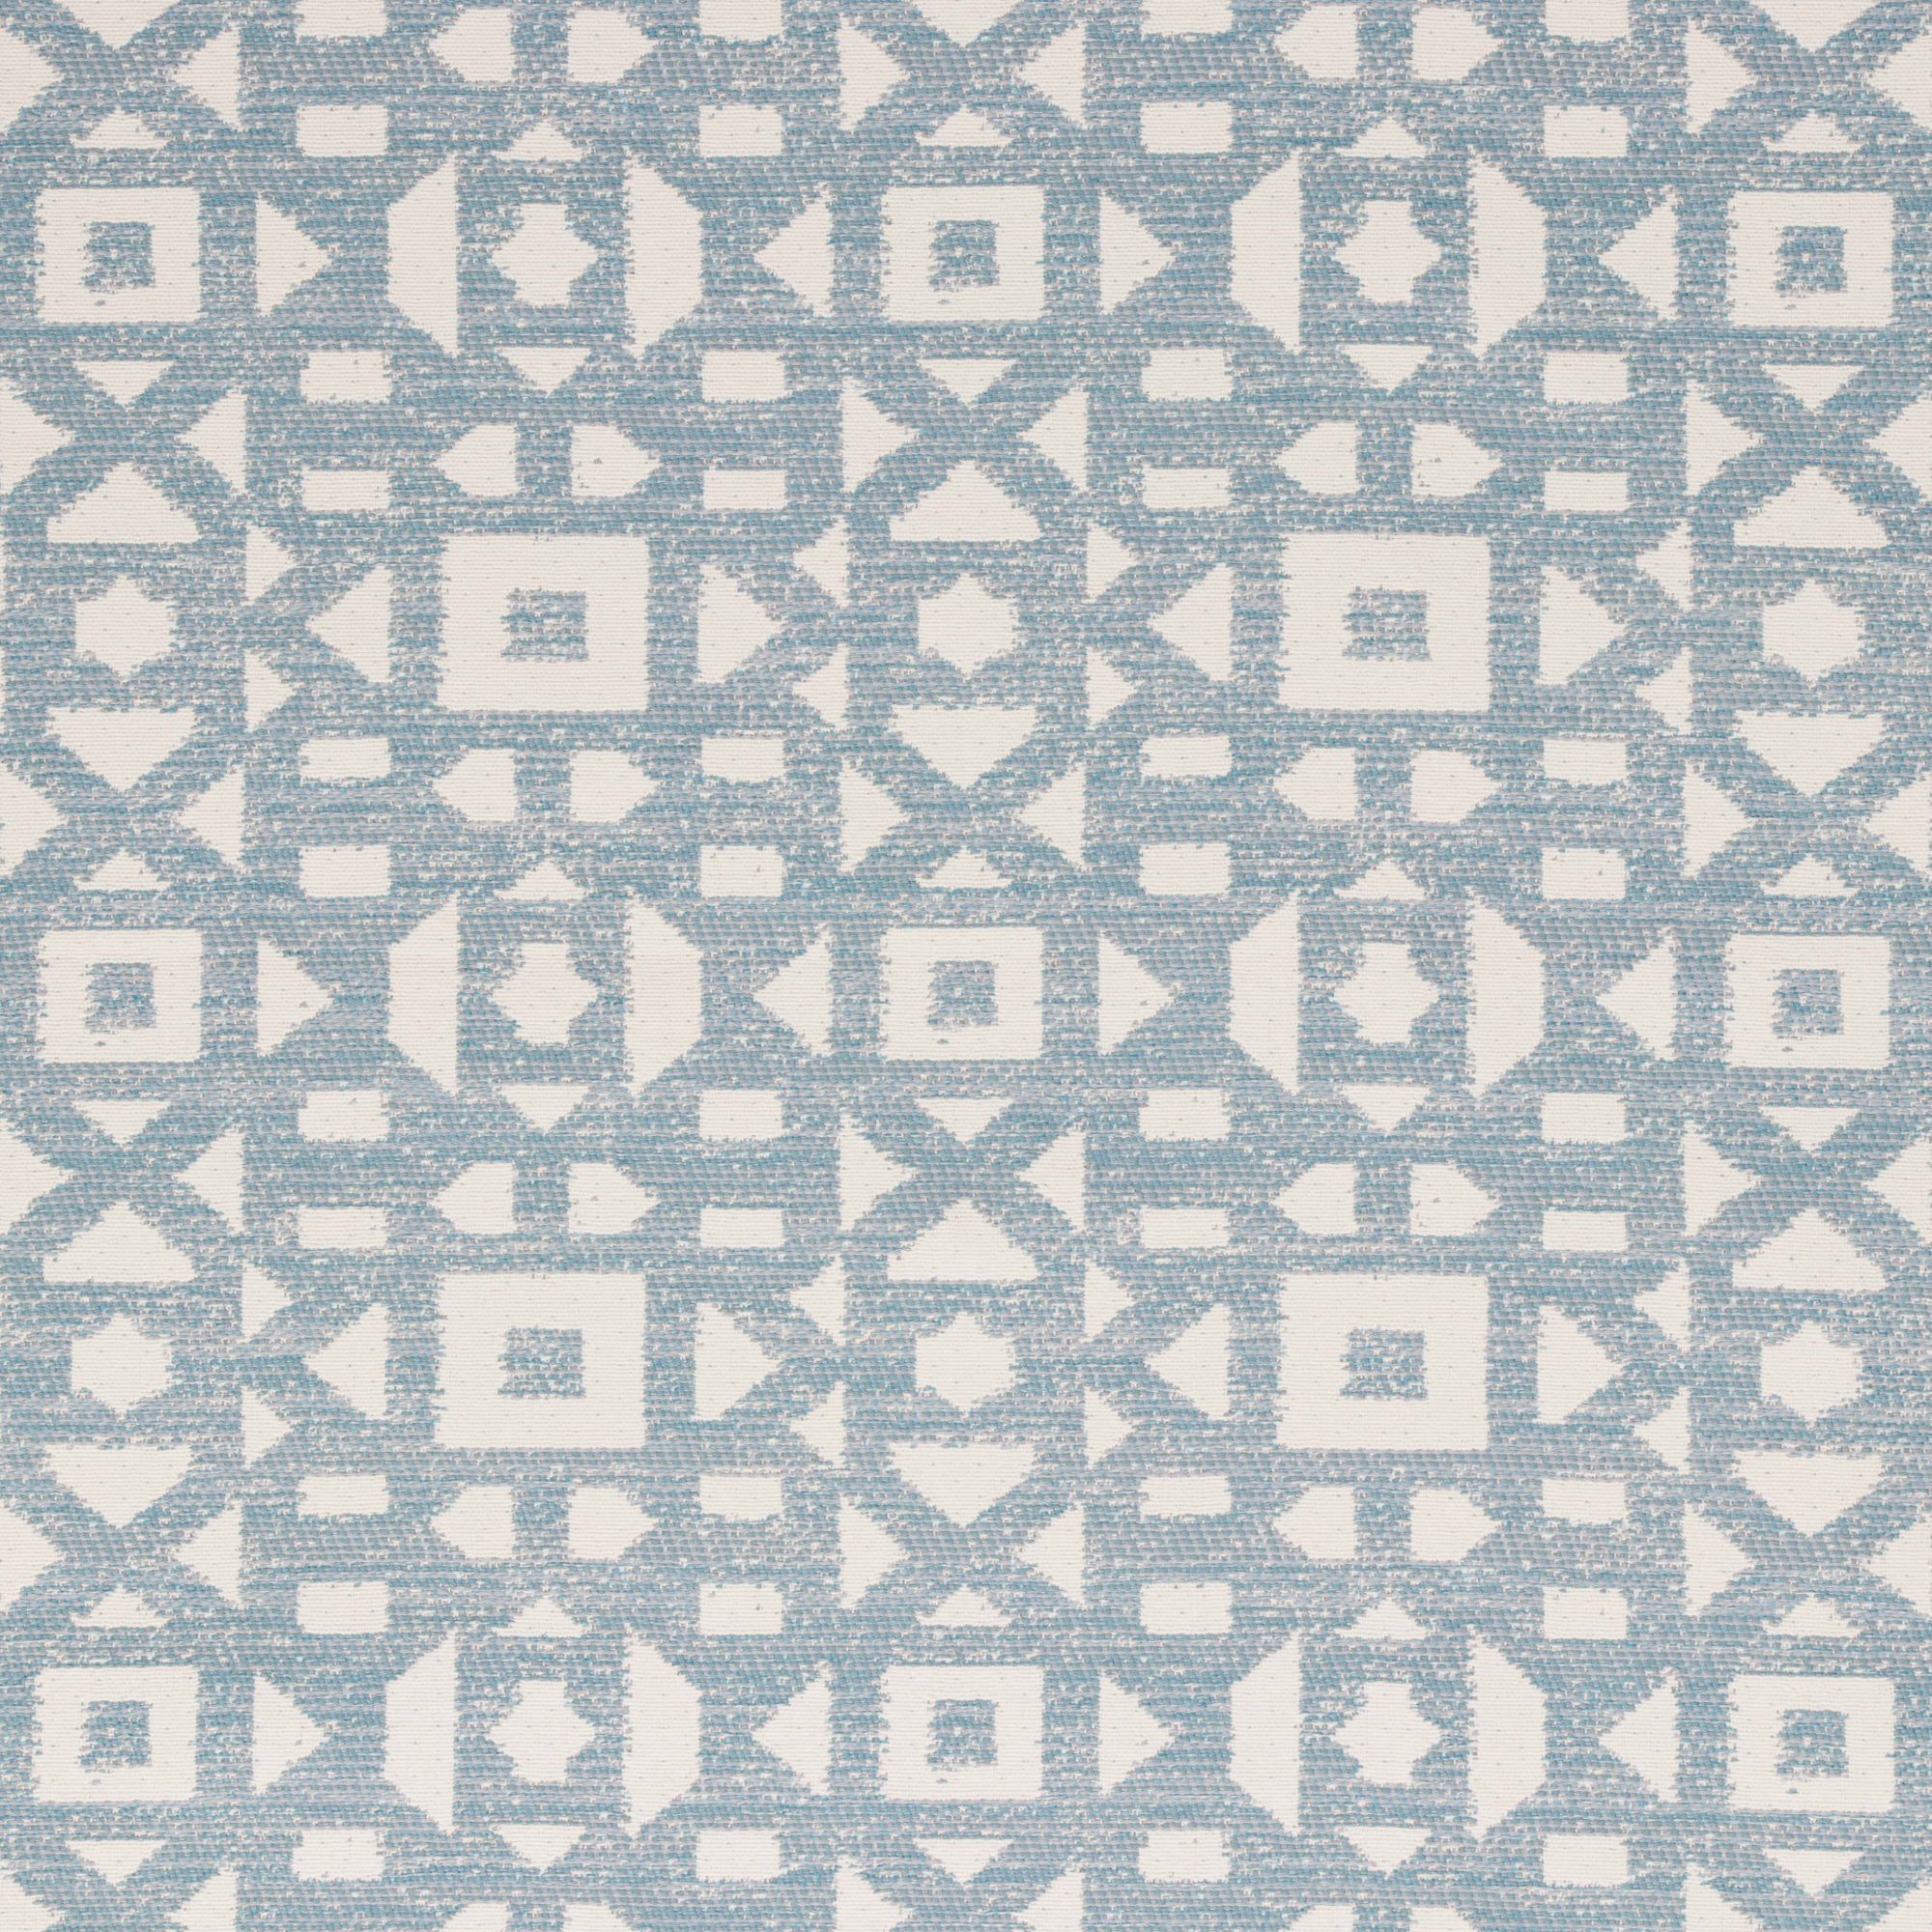 Cut yardage in the Galloway pattern and Cerulean color from Bella Dura and Bella Dura Home.